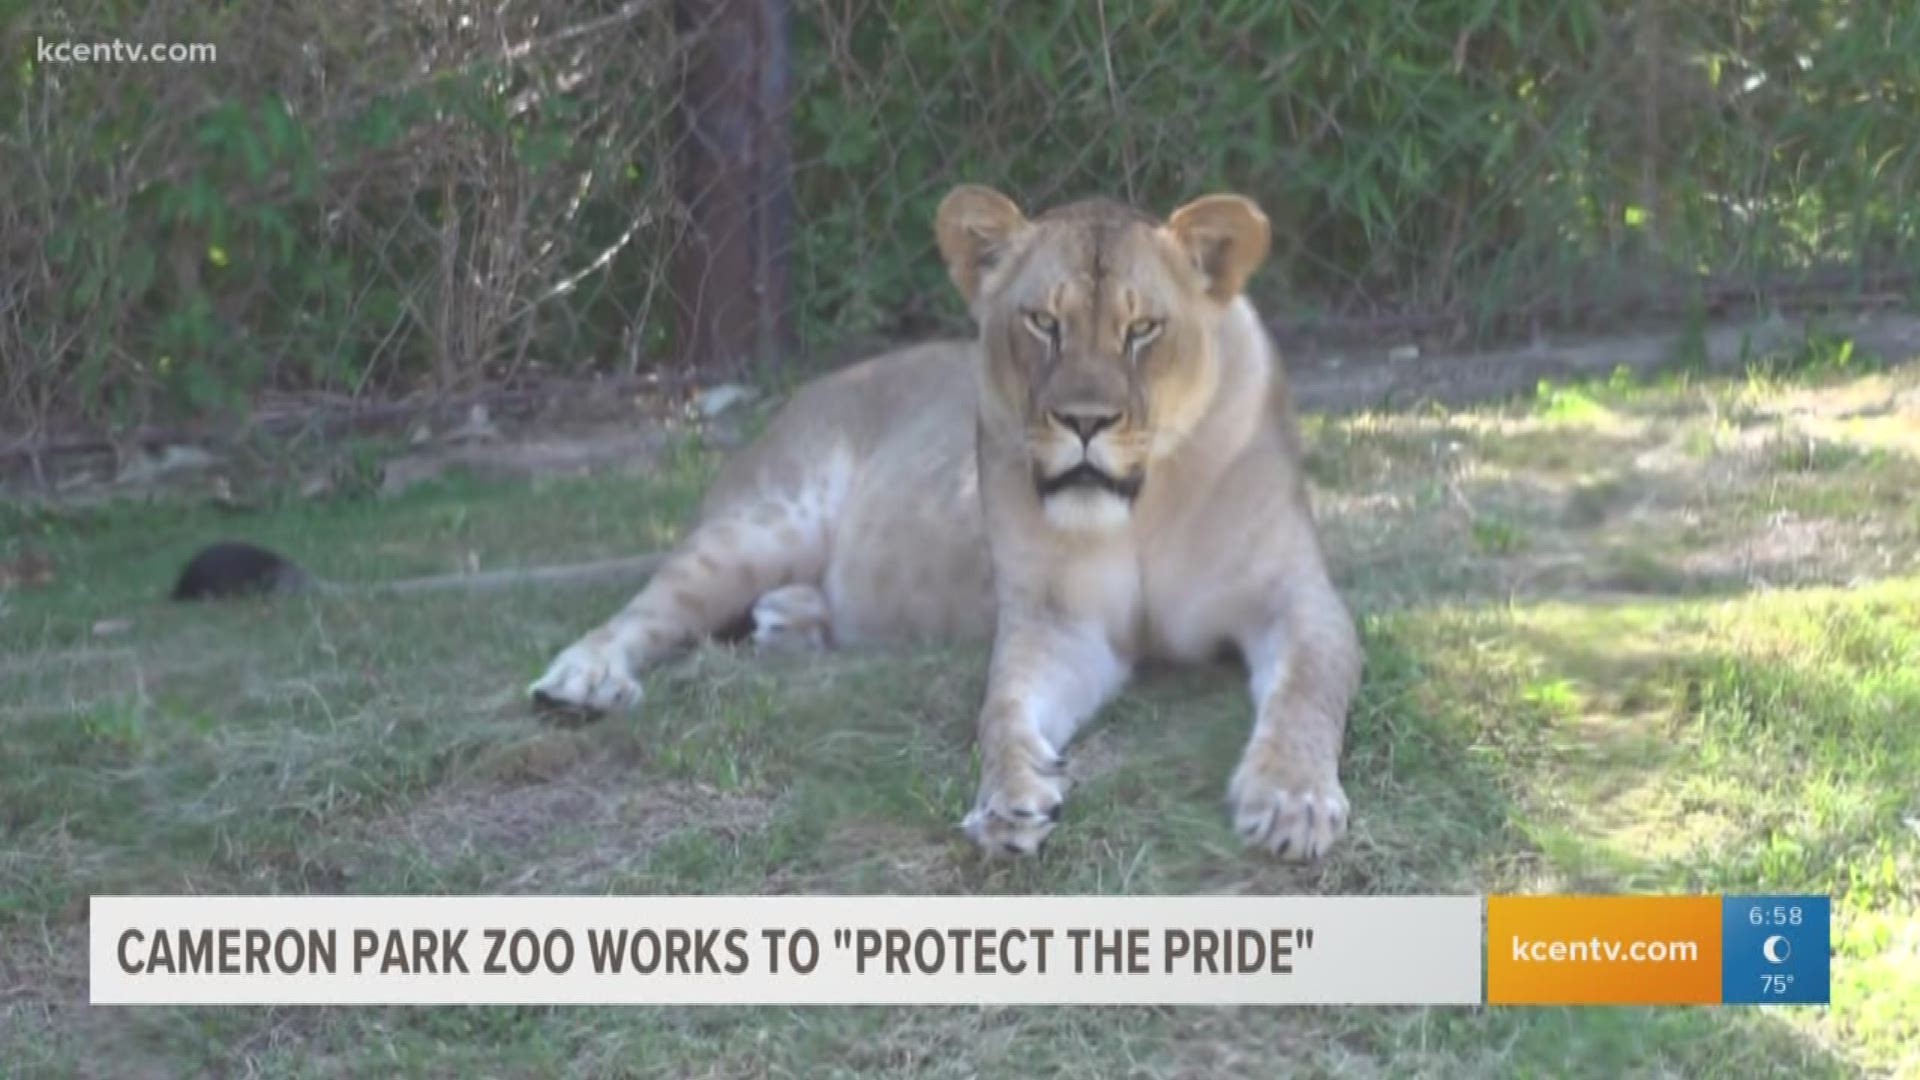 The Cameron Park Zoo is hosting a Lion King movie premiere July 18 in which 100% of the fund will go towards the 'Protect the Pride" campaign.